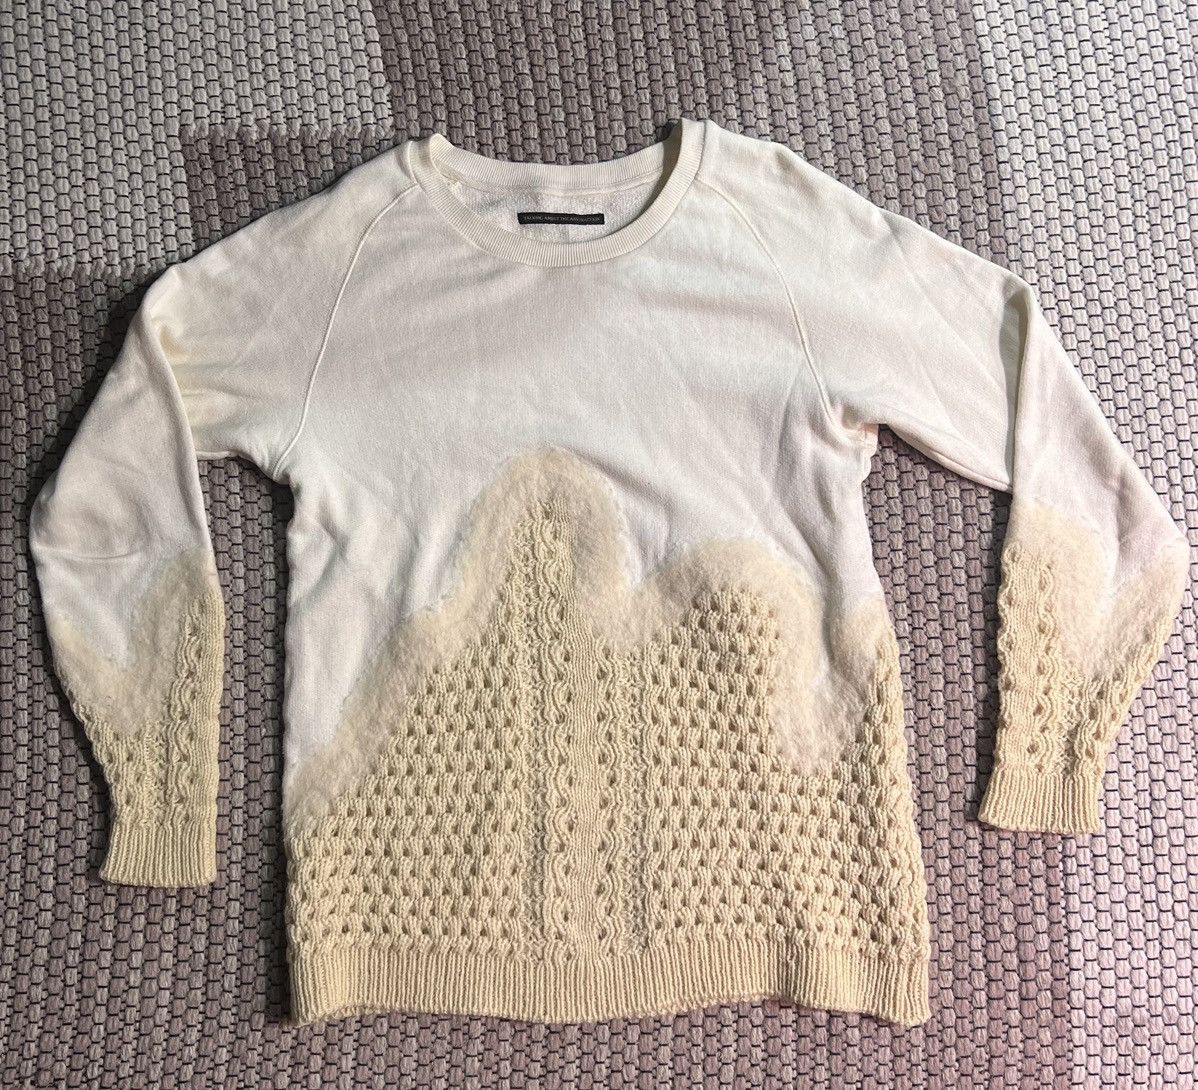 Pre-owned Talking About The Abstraction 50/50 Sweatshirt Sweater In Cream